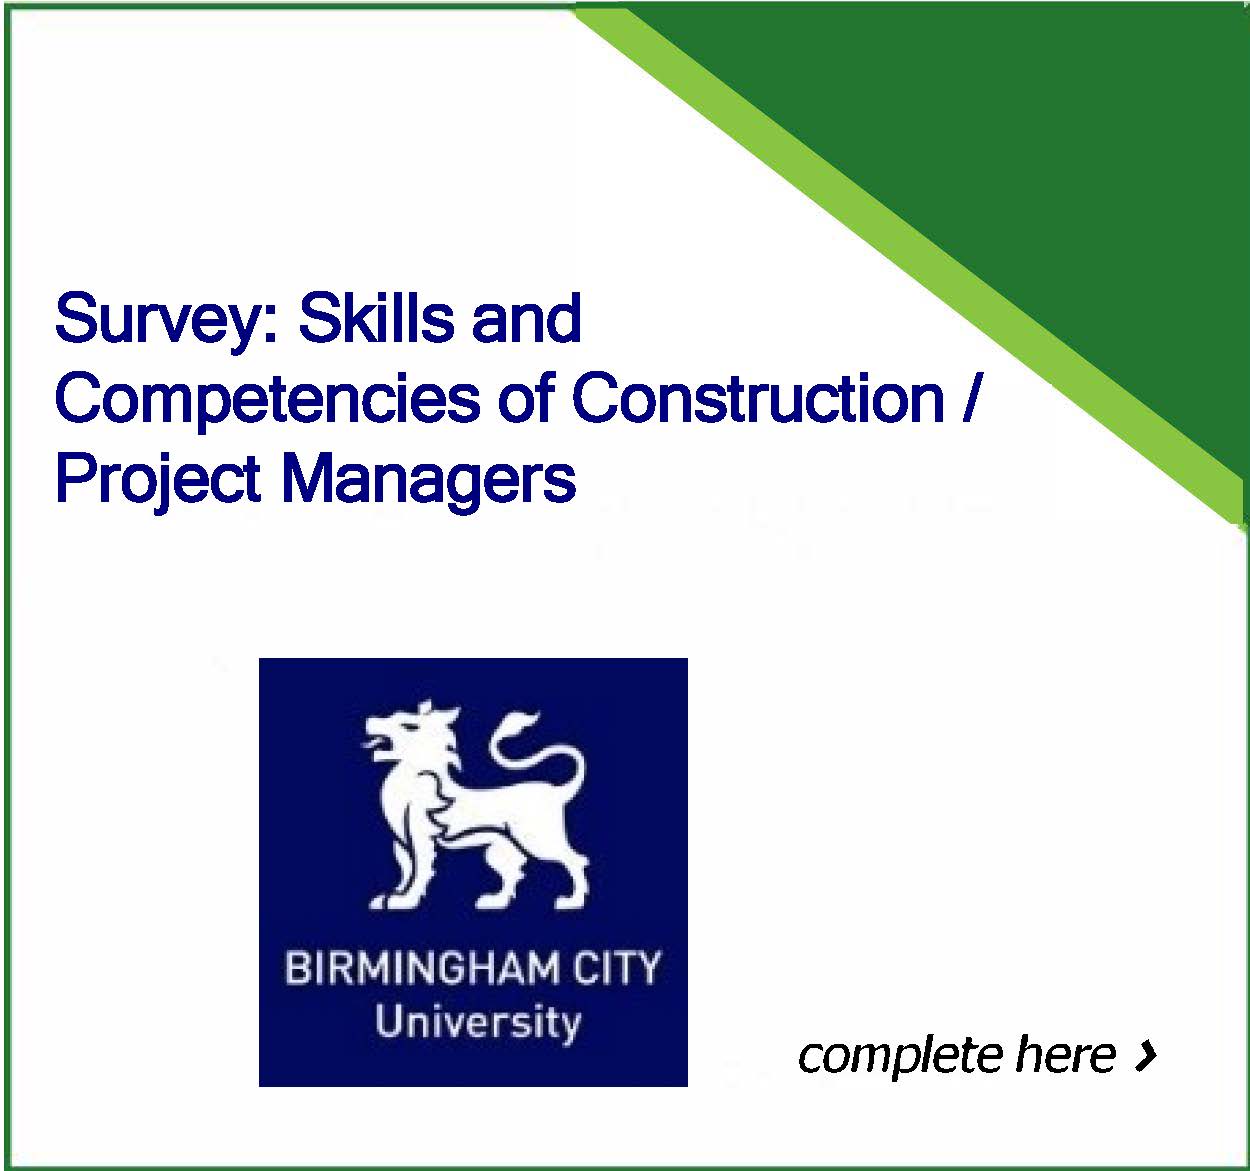 Survey: Skills and Competencies of Construction / Project Managers